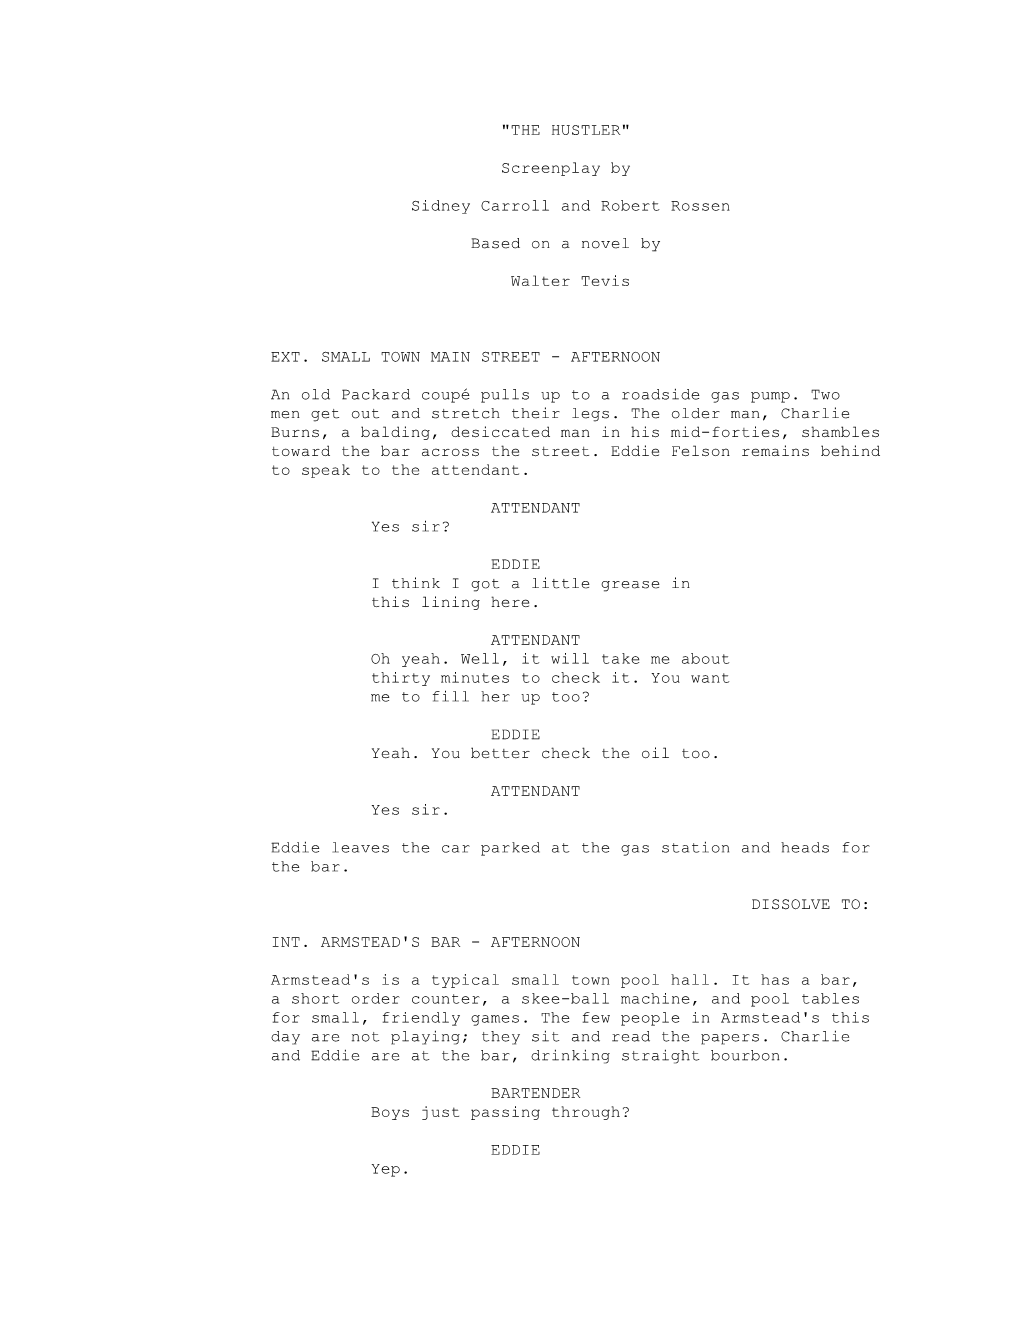 "THE HUSTLER" Screenplay by Sidney Carroll and Robert Rossen Based on a Novel by Walter Tevis EXT. SMALL TOWN MAIN